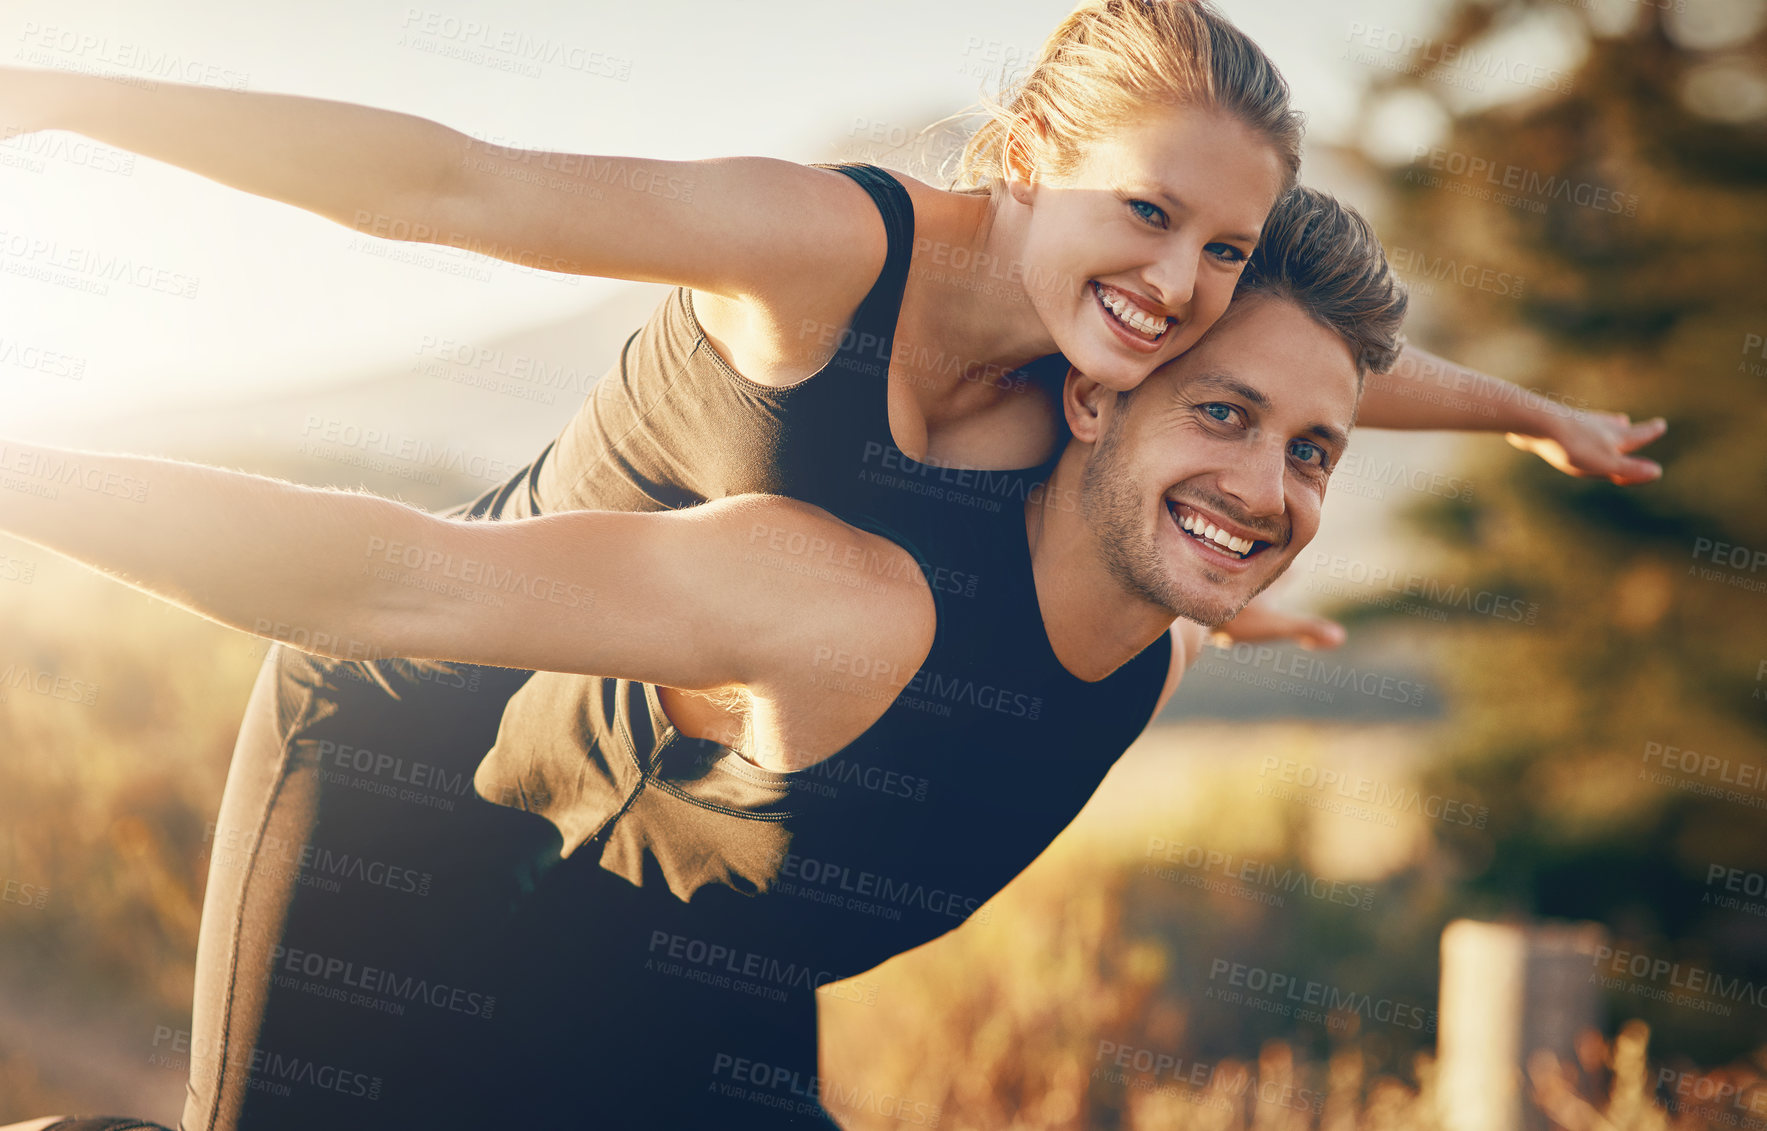 Buy stock photo Shot of a young woman being piggybacked by her boyfriend while they stretch out their arms outdoors